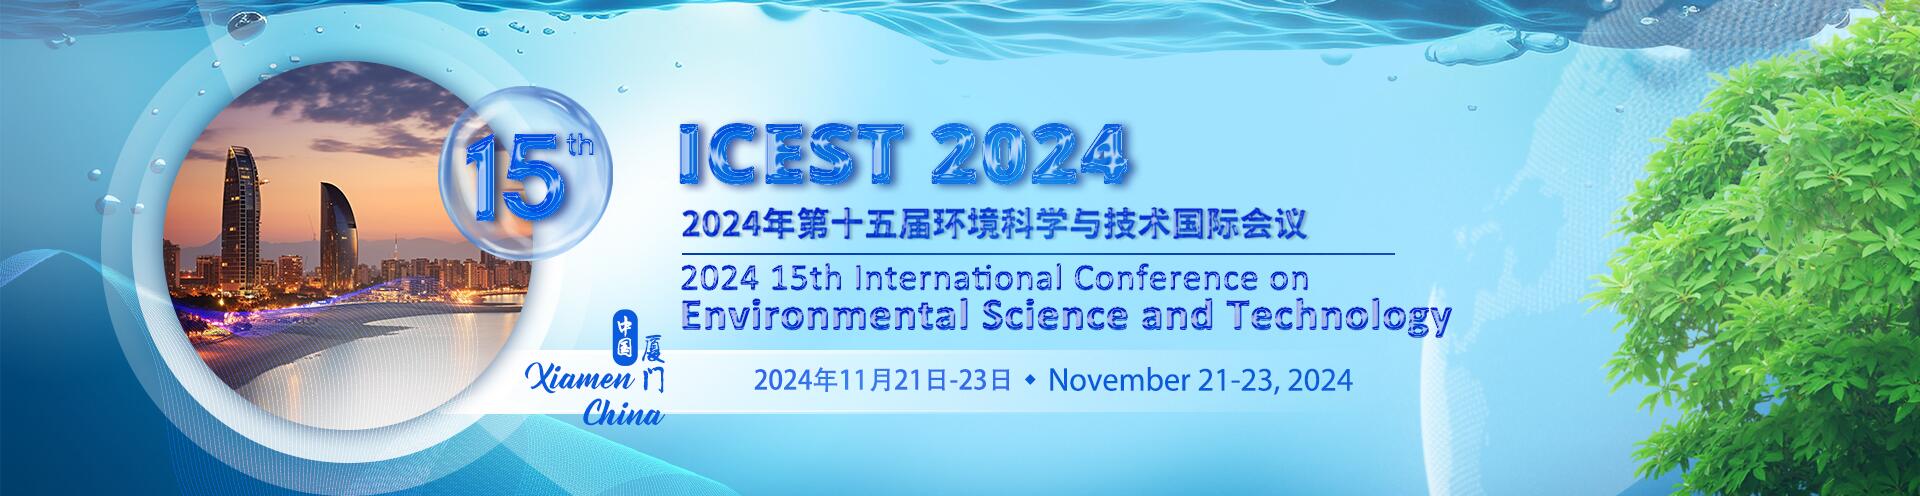 2024 15th International Conference on Environmental Science and Technology (ICEST 2024), Xiamen, Fujian, China